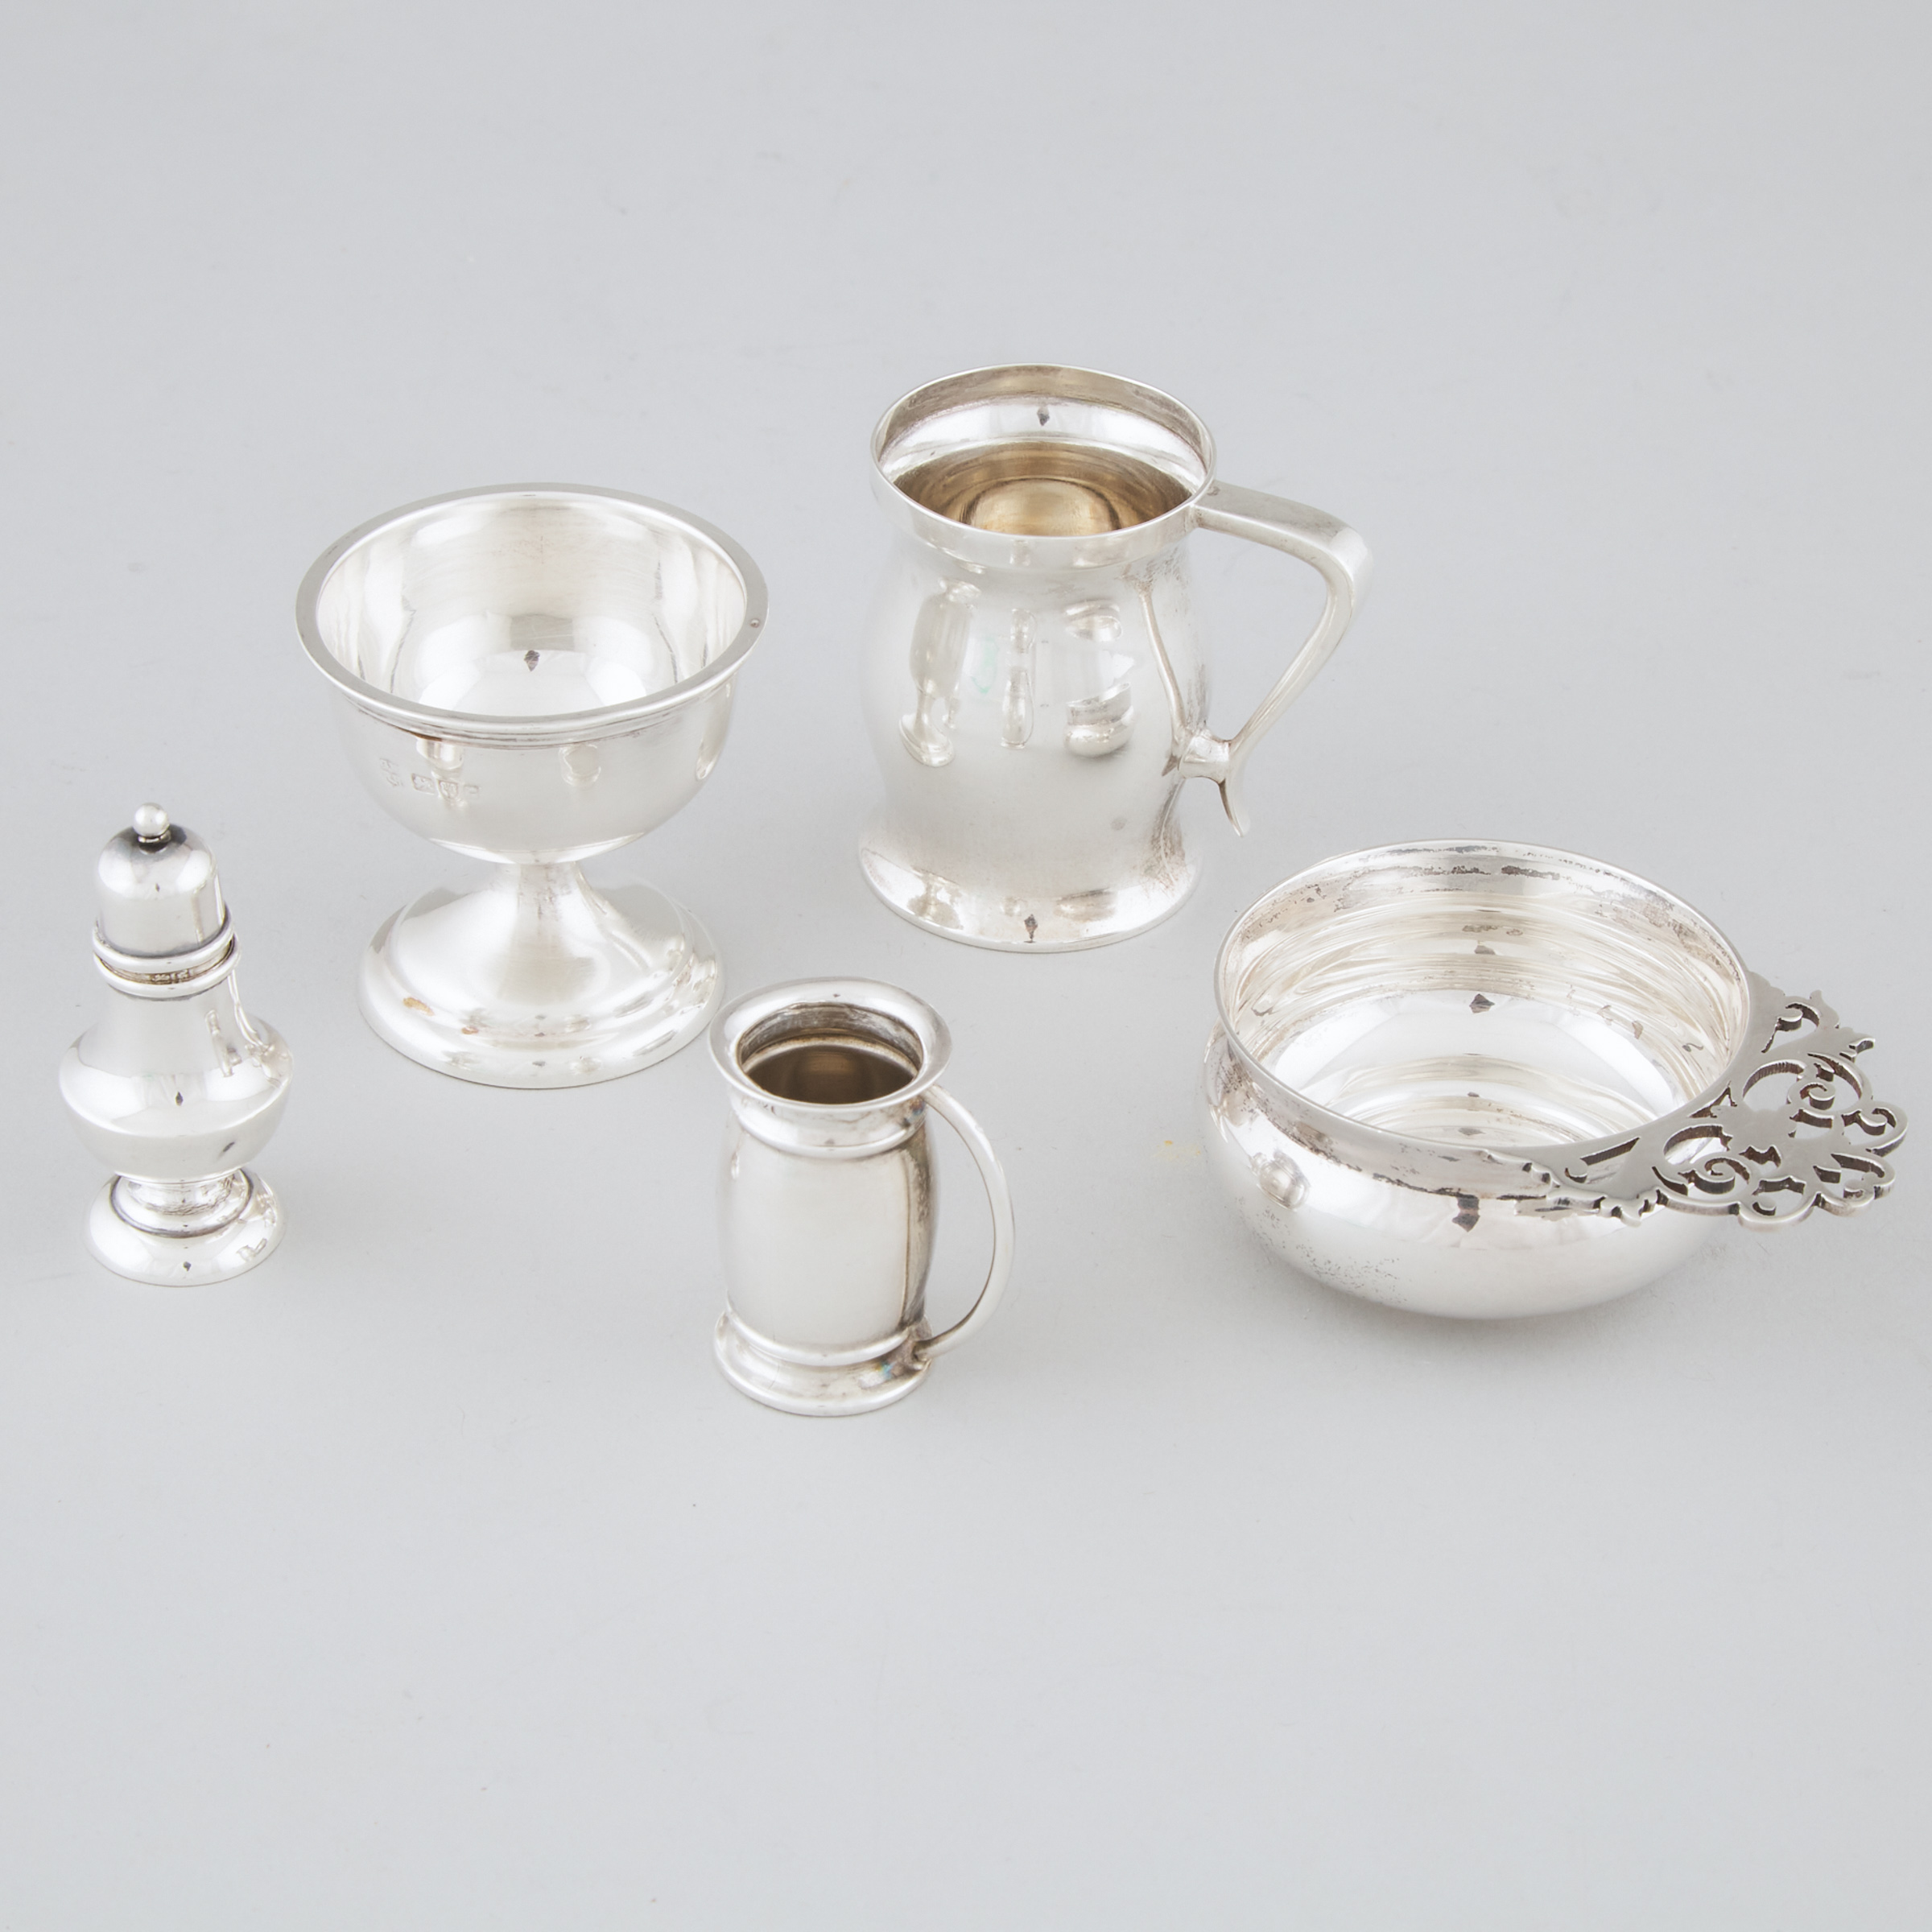 Group of English and Scottish Silver Small Articles, late 19th/20th century